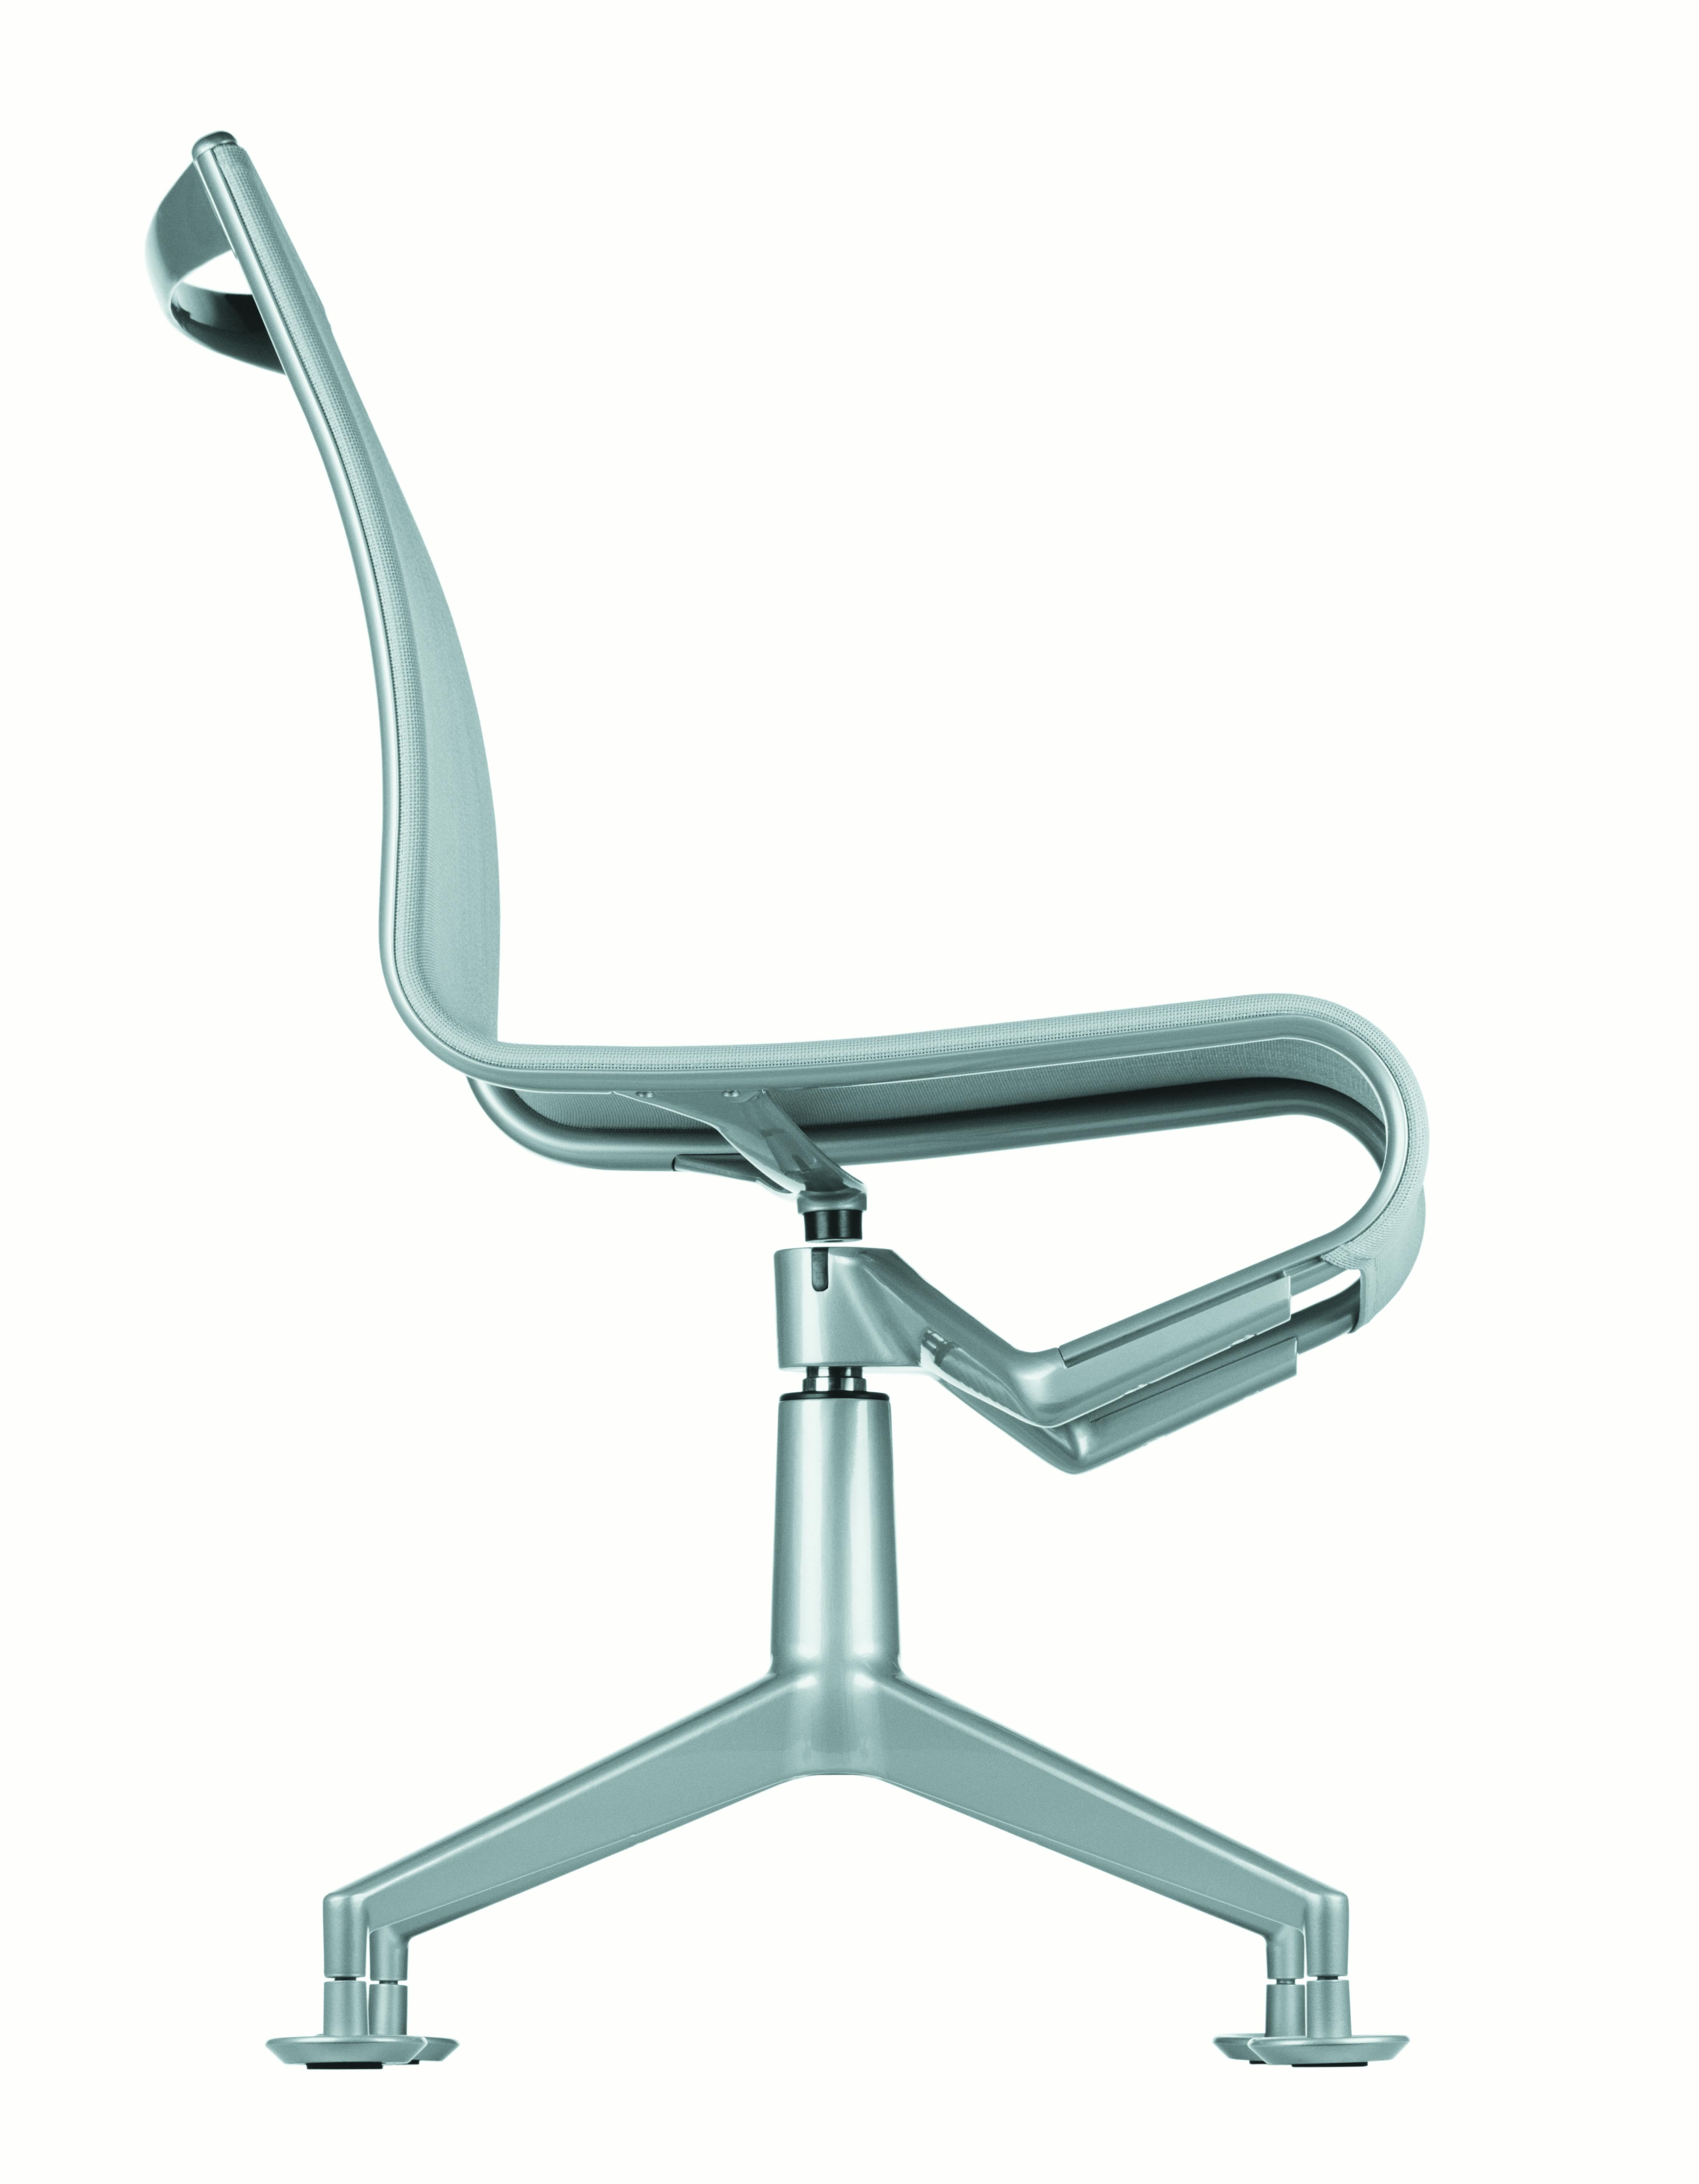 Alias 437 Meetingframe 44 Chair in White Mesh with Lacquered Aluminum Frame by Alberto Meda

Self adjusting swivel chair with arms with 4-star base with glides. Structure made of extruded aluminium profile and die-cast aluminium elements. Seat and